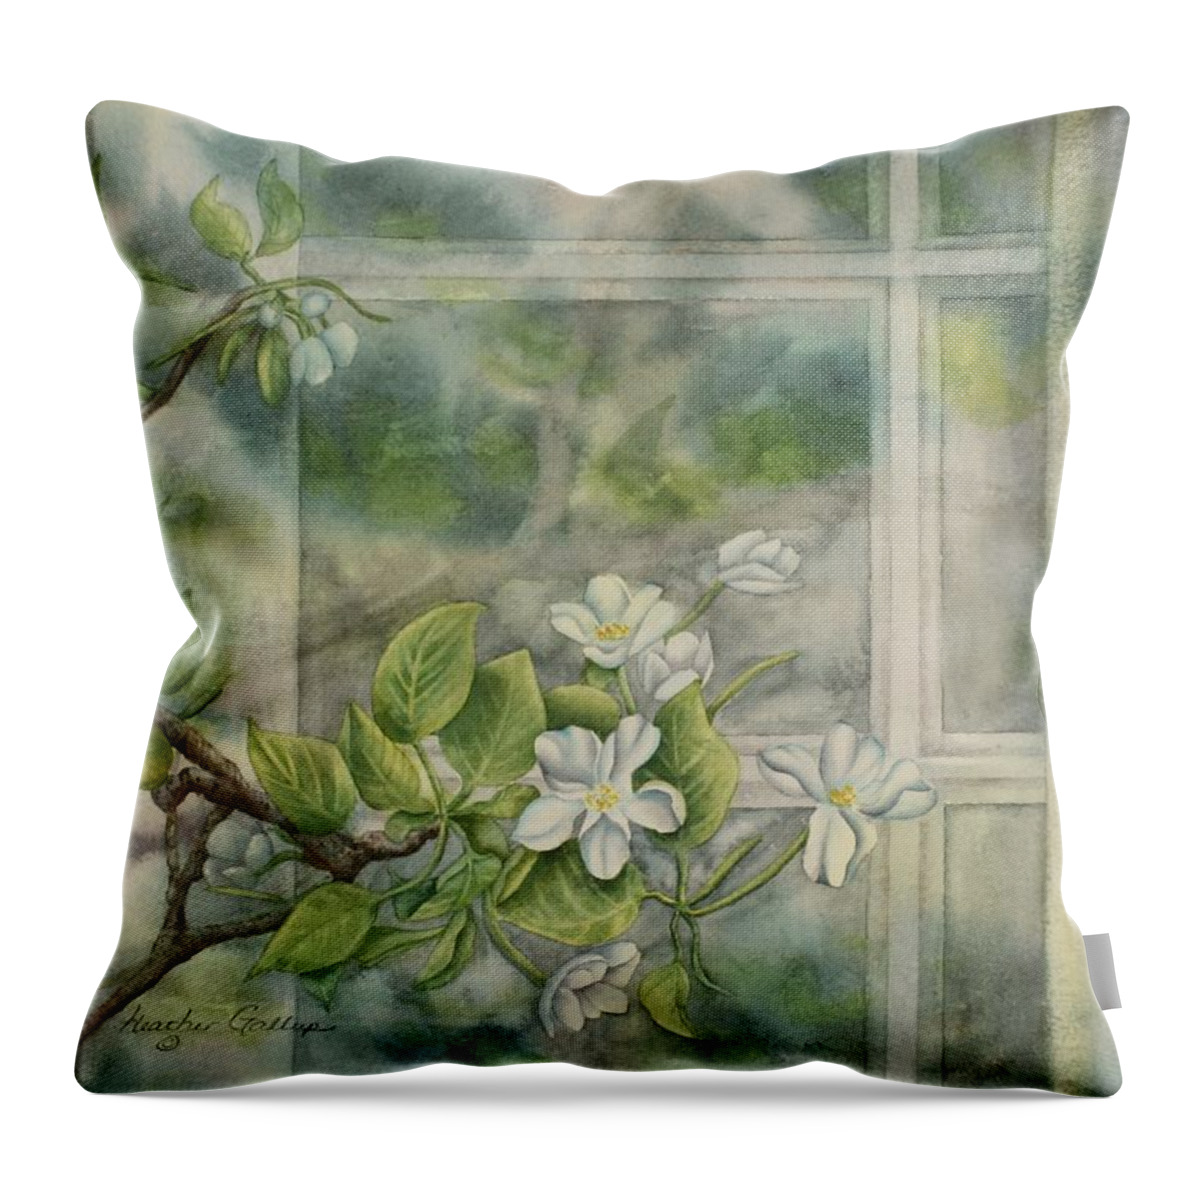 Blossoms Throw Pillow featuring the painting Blossoms Inside and Out by Heather Gallup